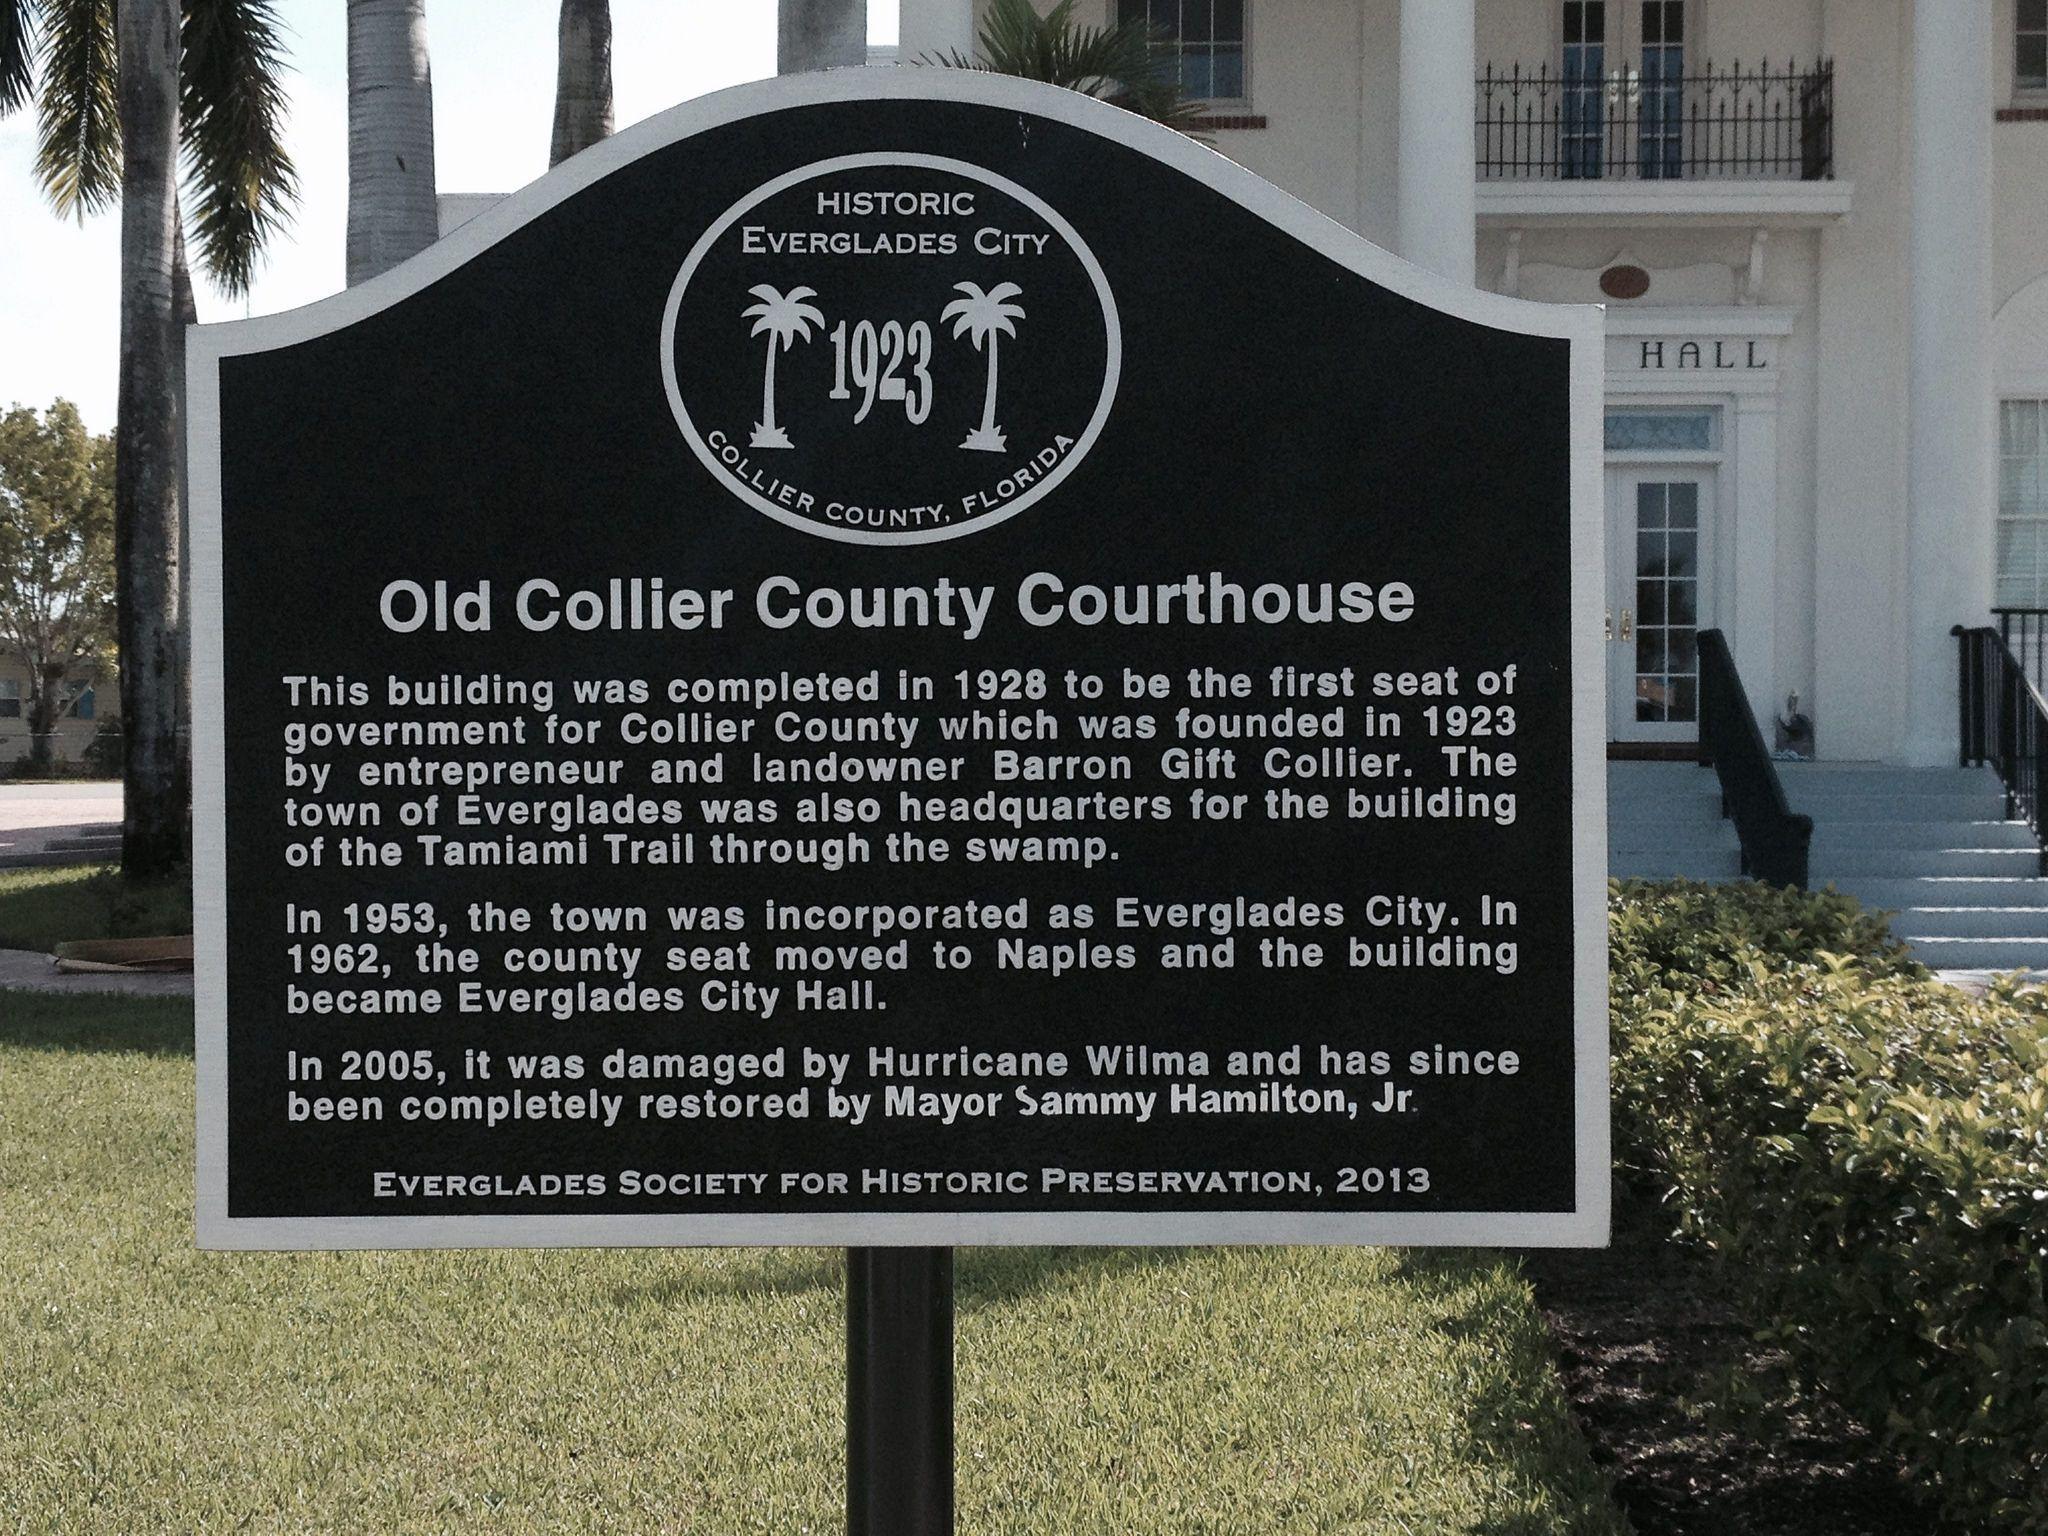 Old Collier Logo - Old Collier County Courthouse sign in Everglades City, Florida. Paul